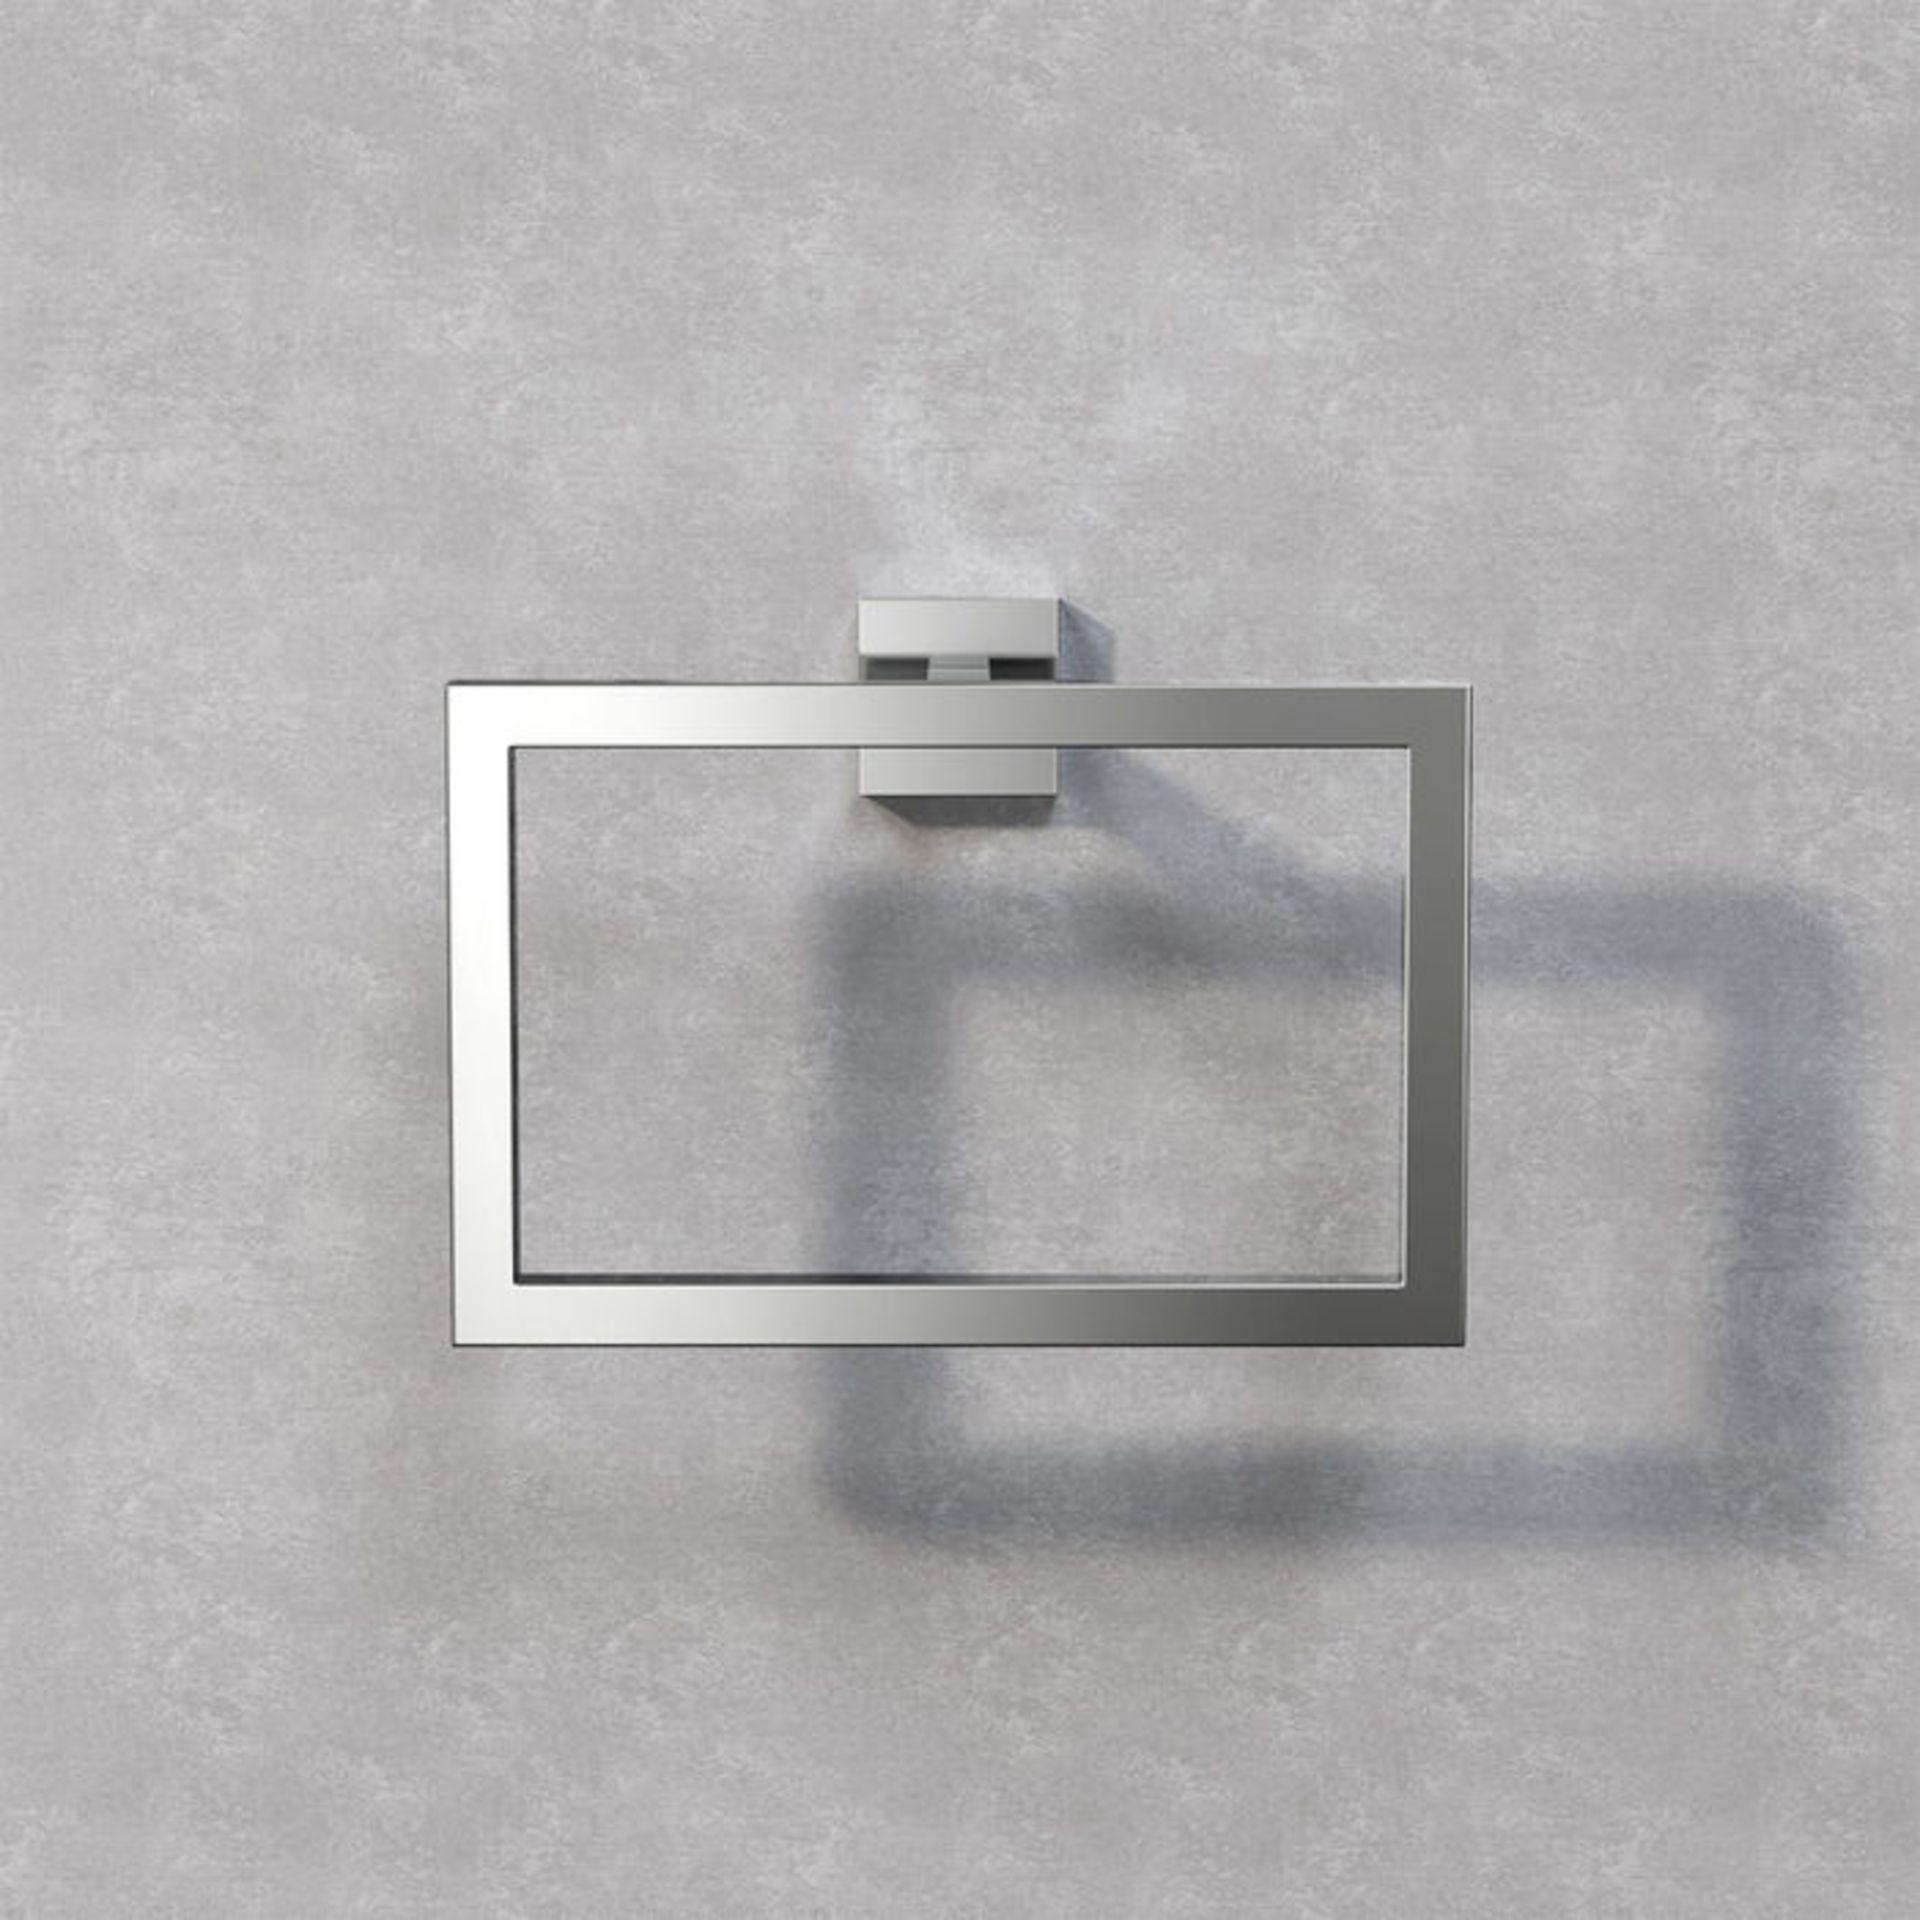 (G18) Jesmond Towel Ring Finishes your bathroom with a little extra functionality and style Made - Image 3 of 4